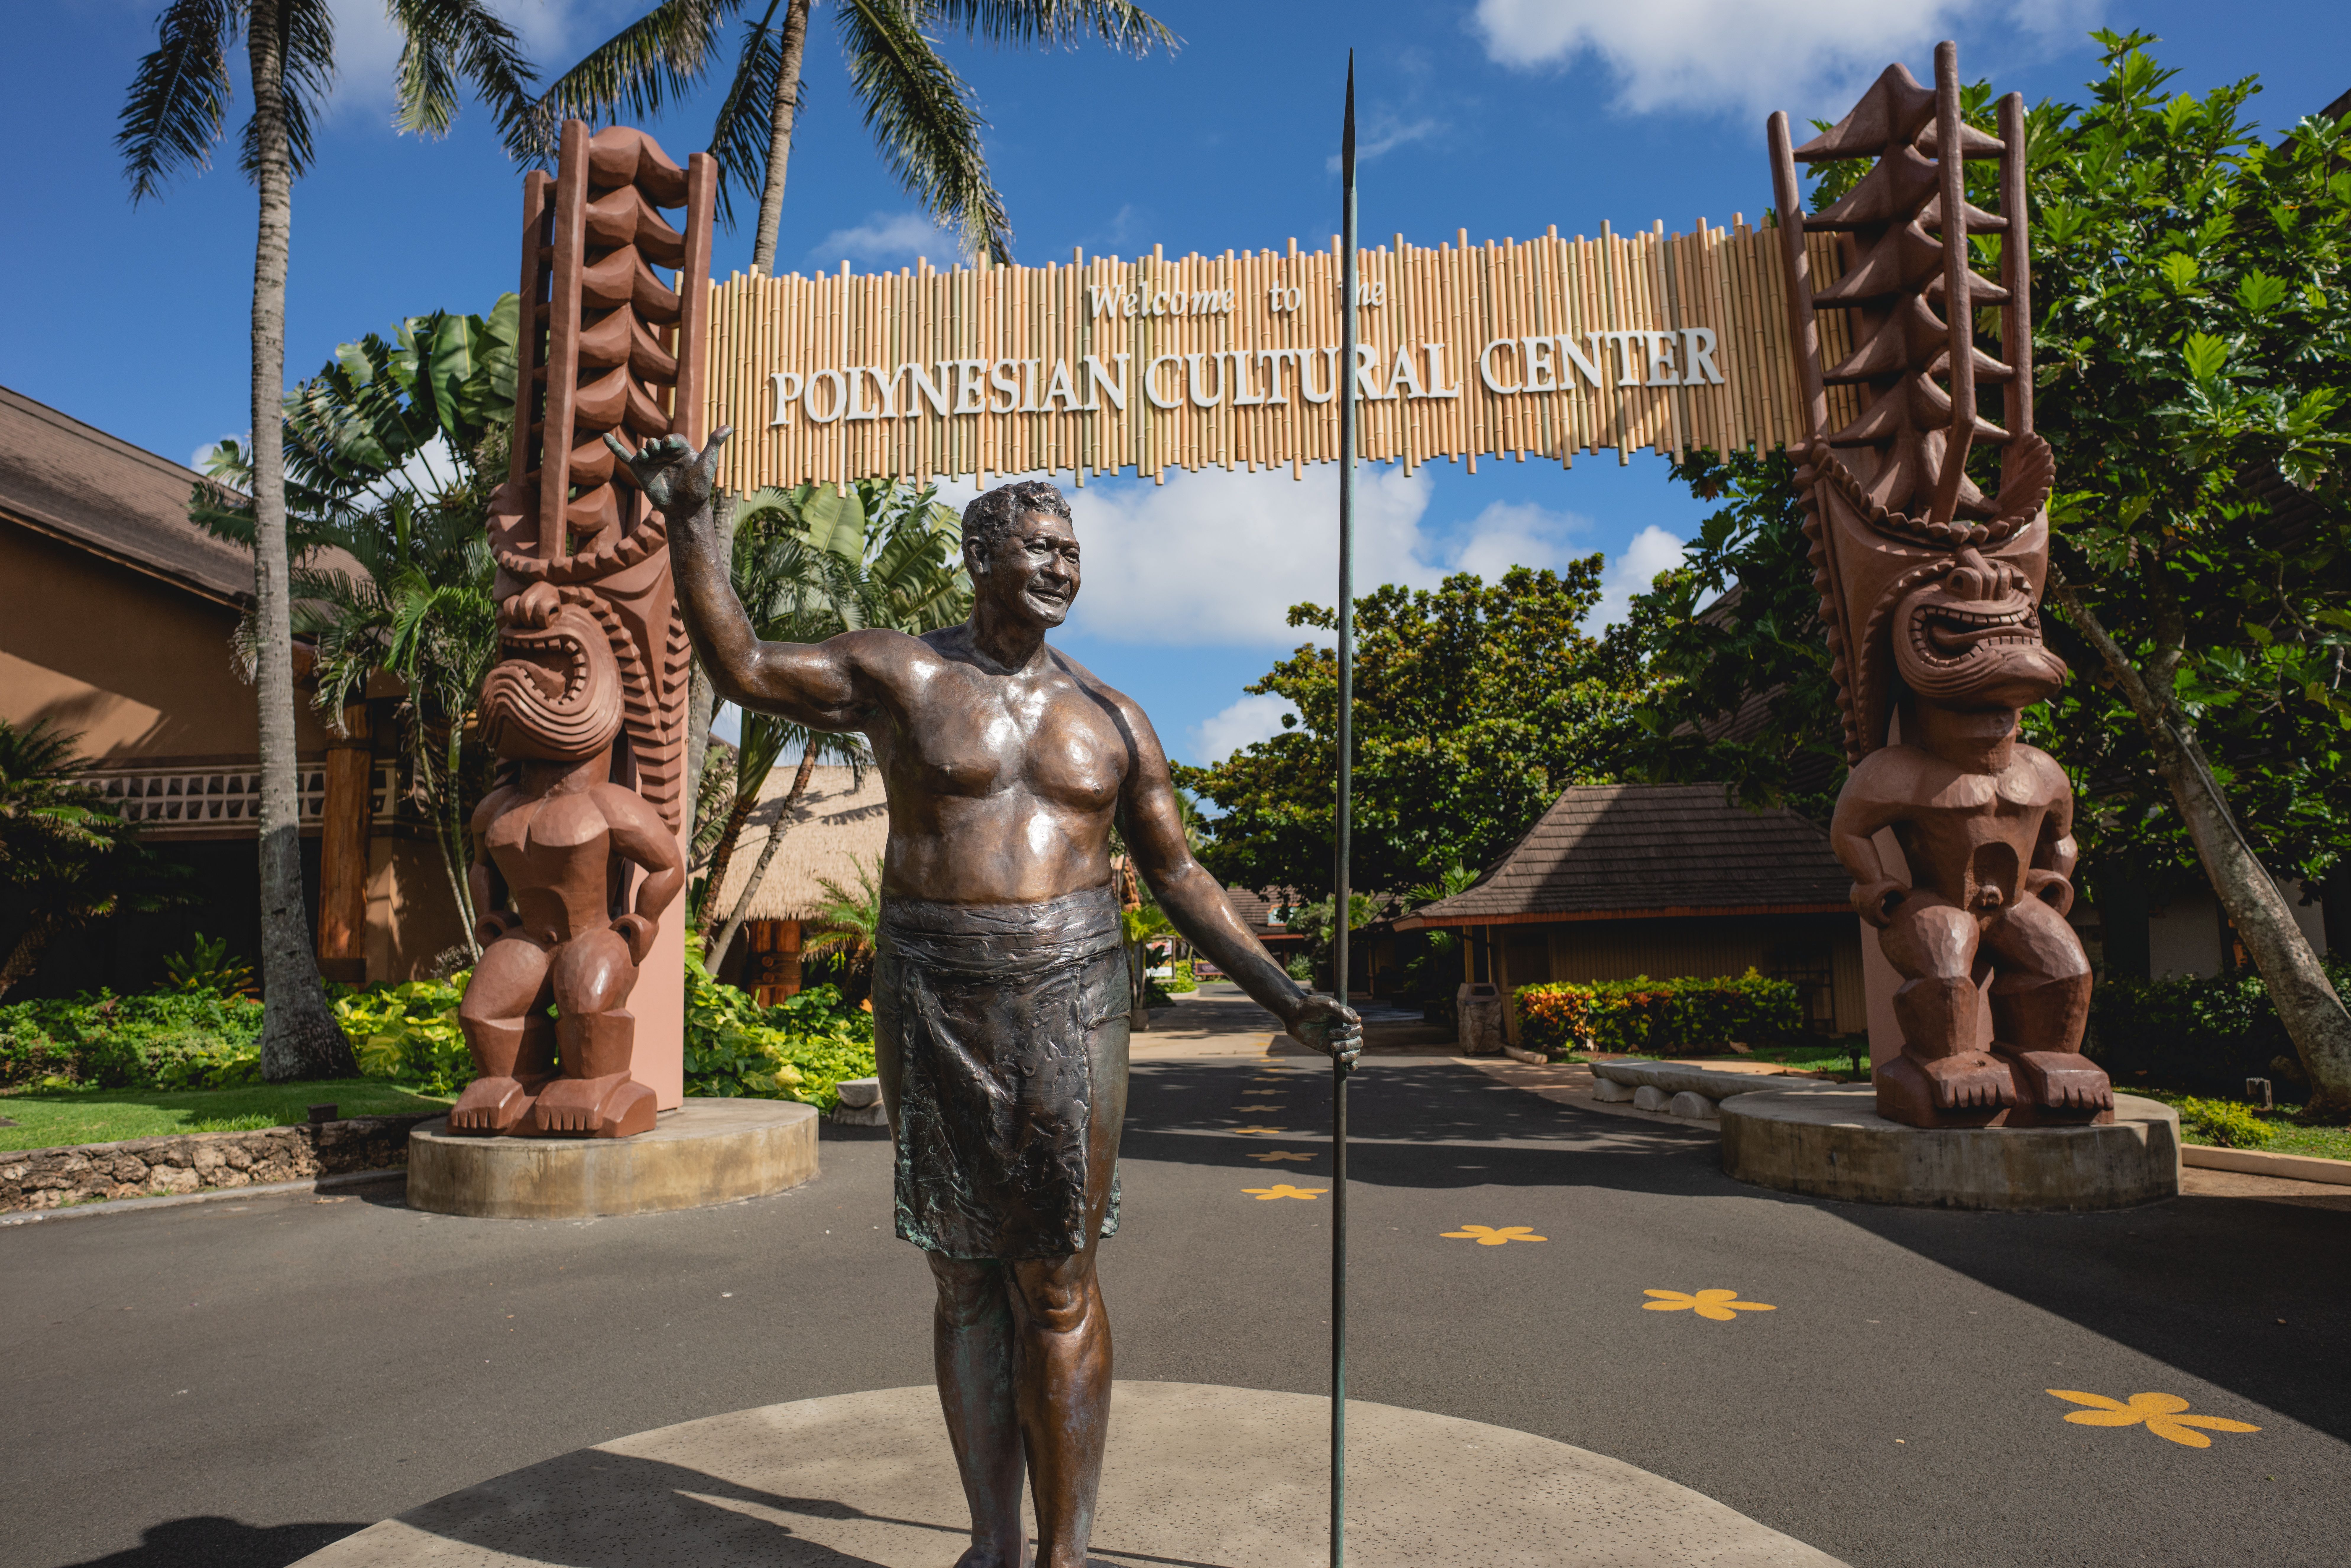 statue of Hamana Kahili at the front entrance to the Polynesian Cultural Center opposites the Hukilau Marketplace.